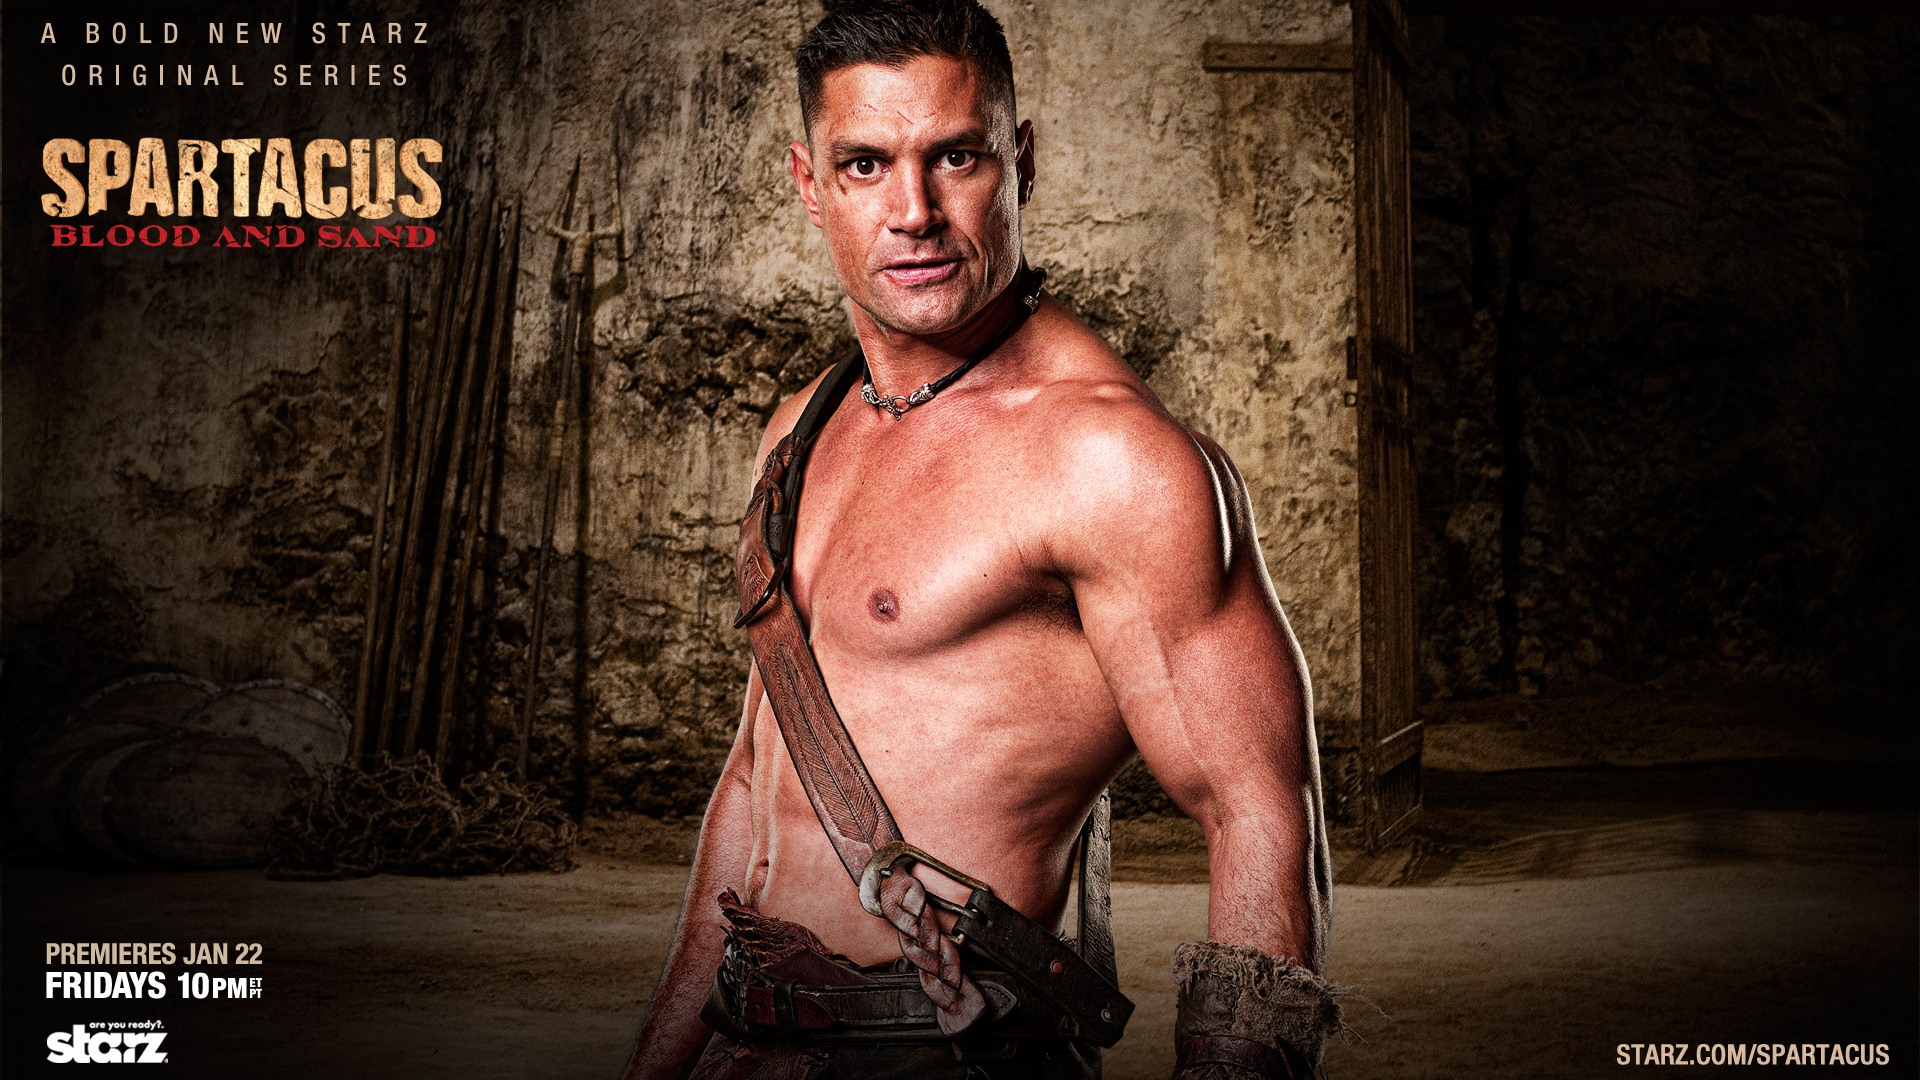 Spartacus: Blood and Sand HD wallpapers #8 - 1920x1080